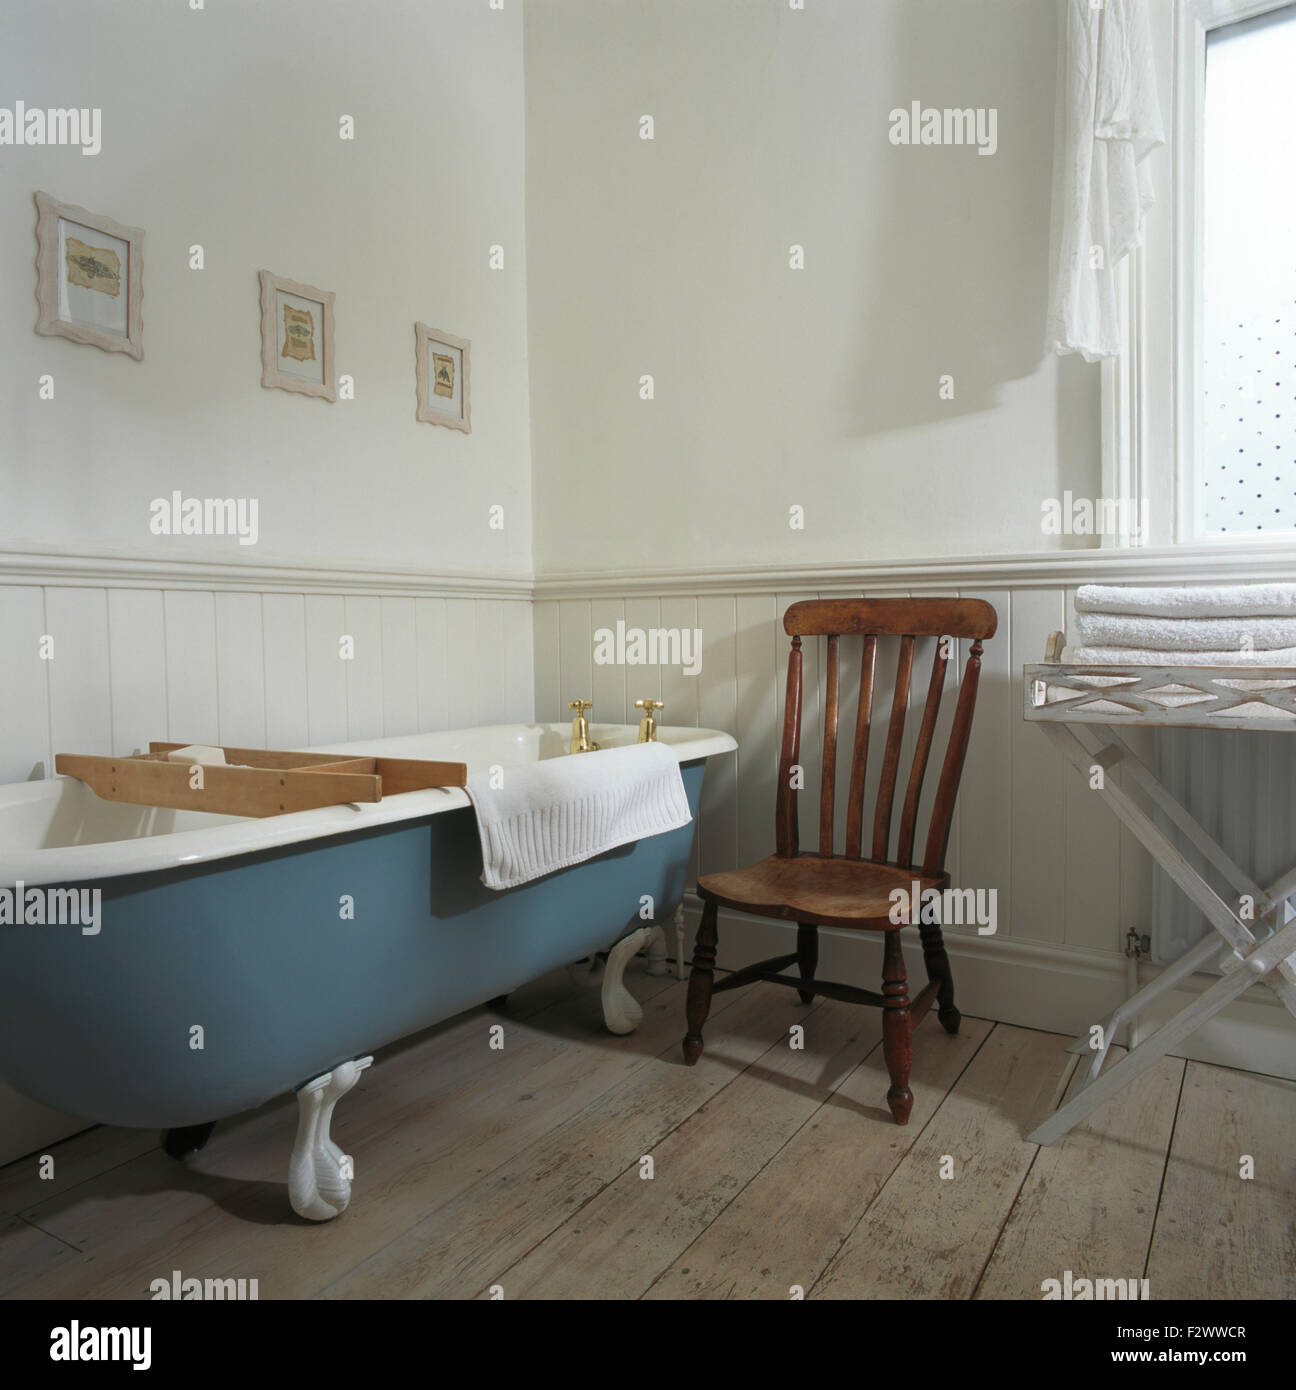 Antique wooden chair beside blue roll top bath in traditional bathroom with lime washed floor boards Stock Photo